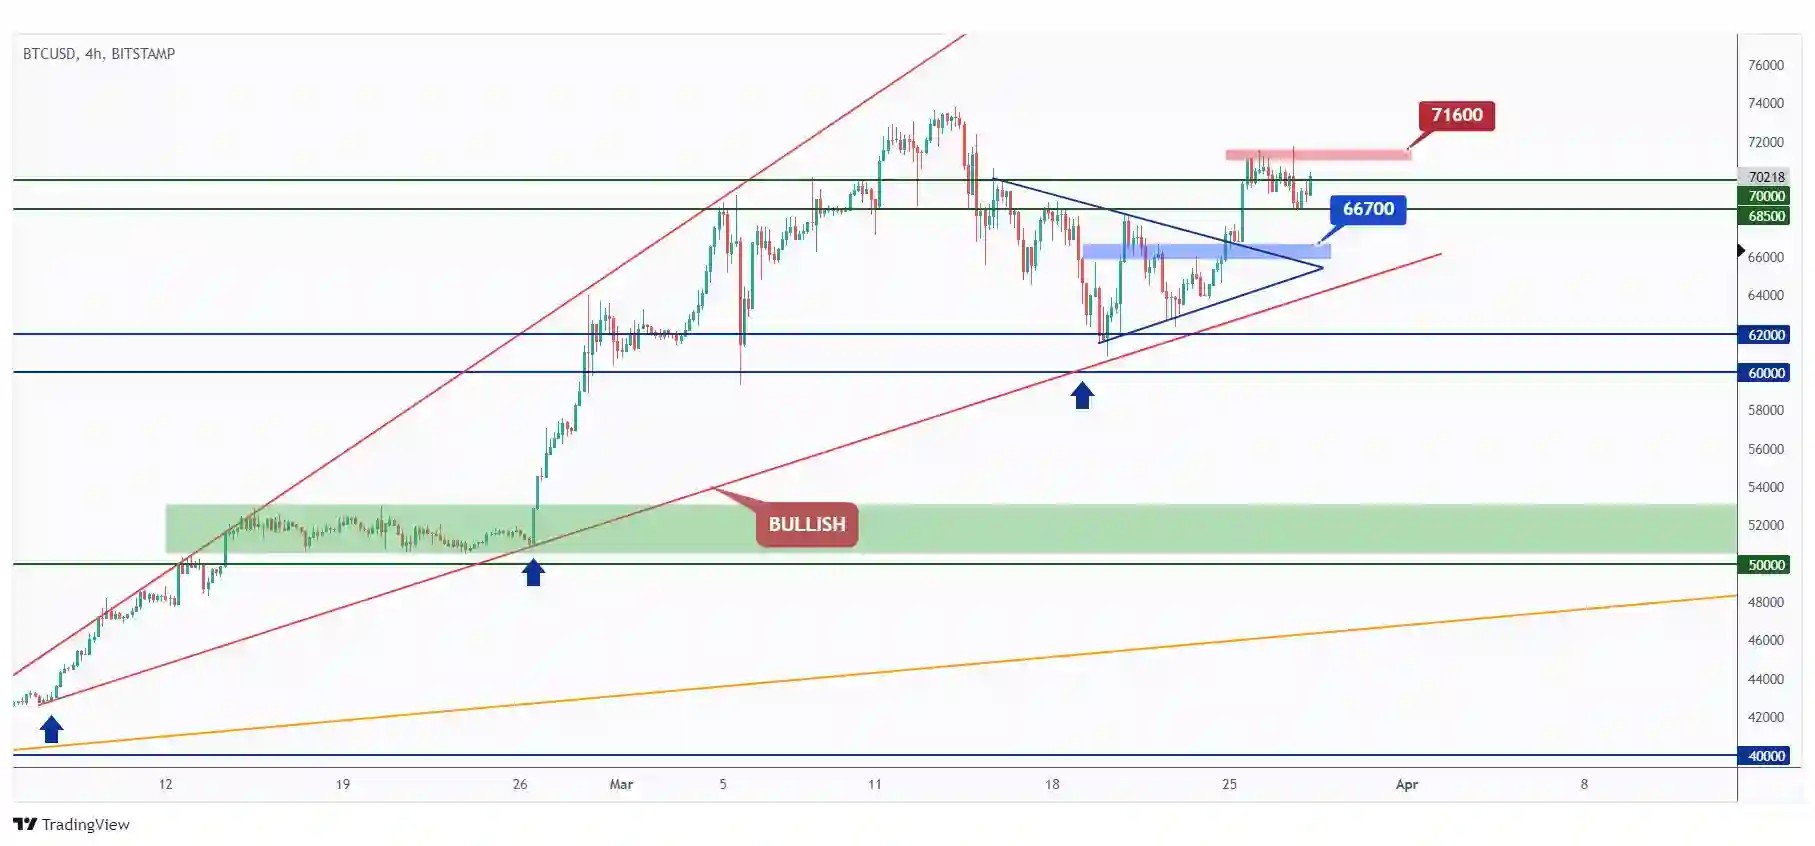 BTC 4h chart showing the last major high at $71,600 that we need a break above for the bulls to maintain control.